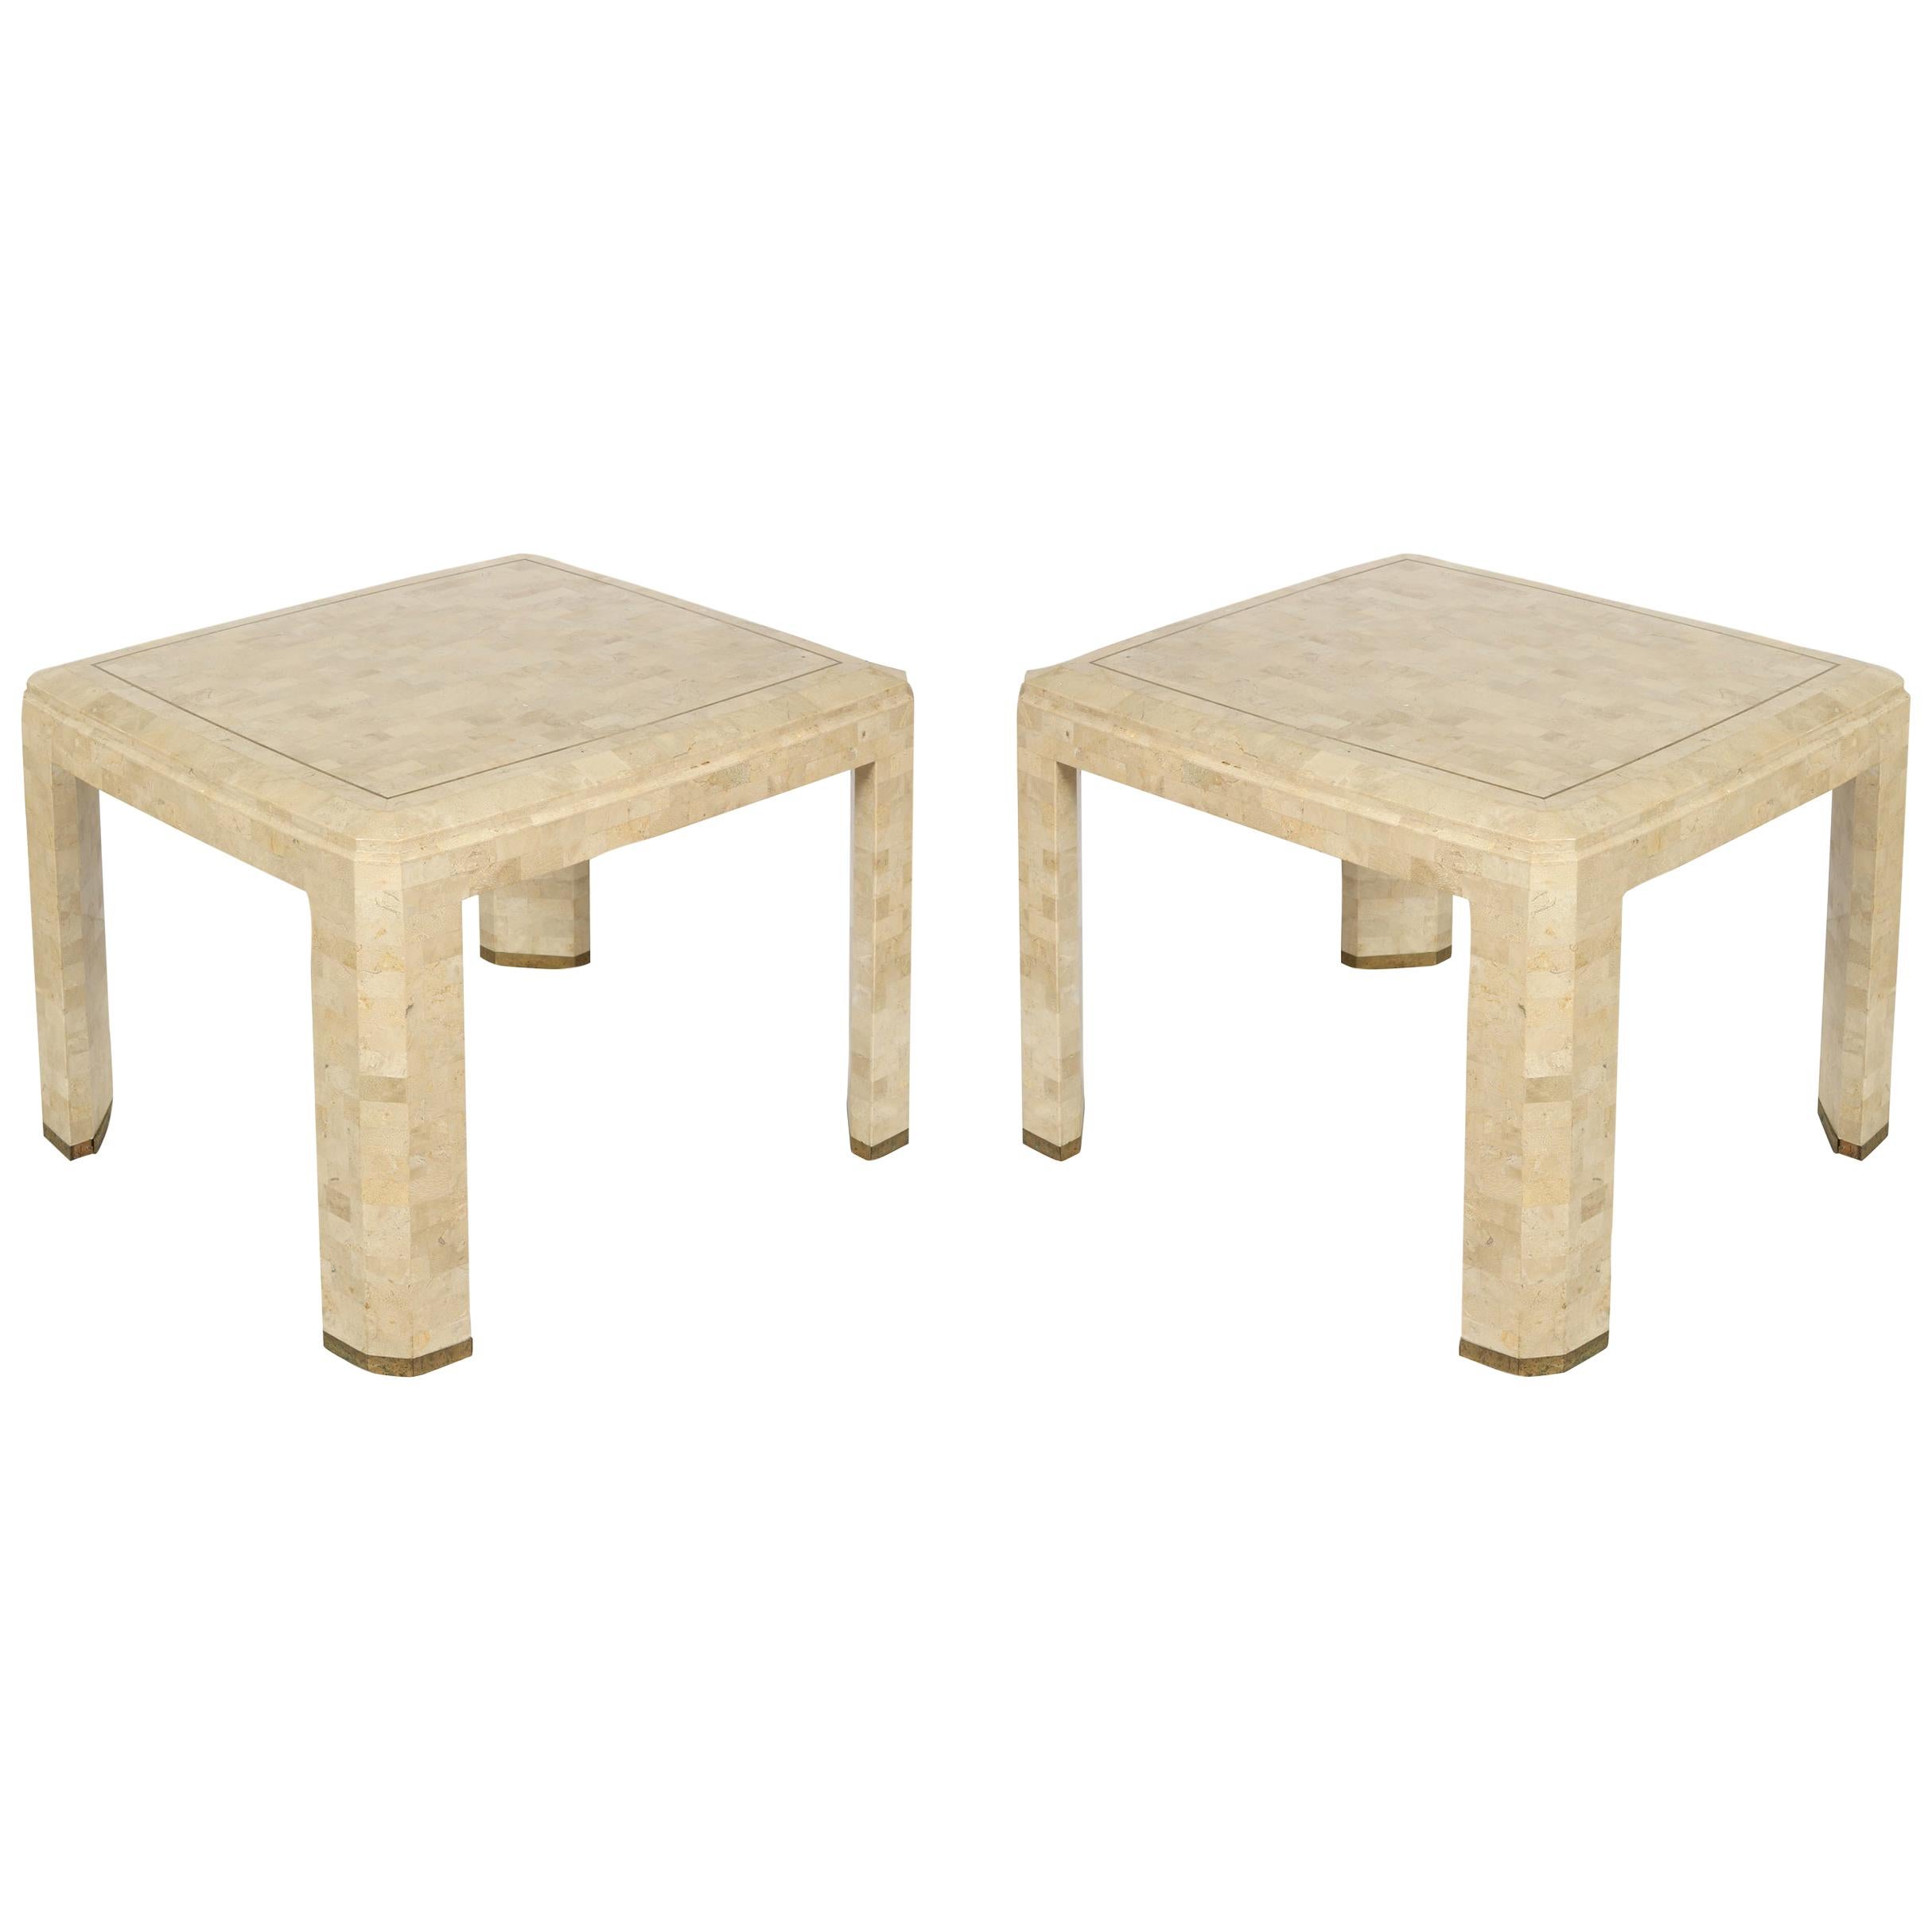 Pair of Tessellated Stone Side Tables